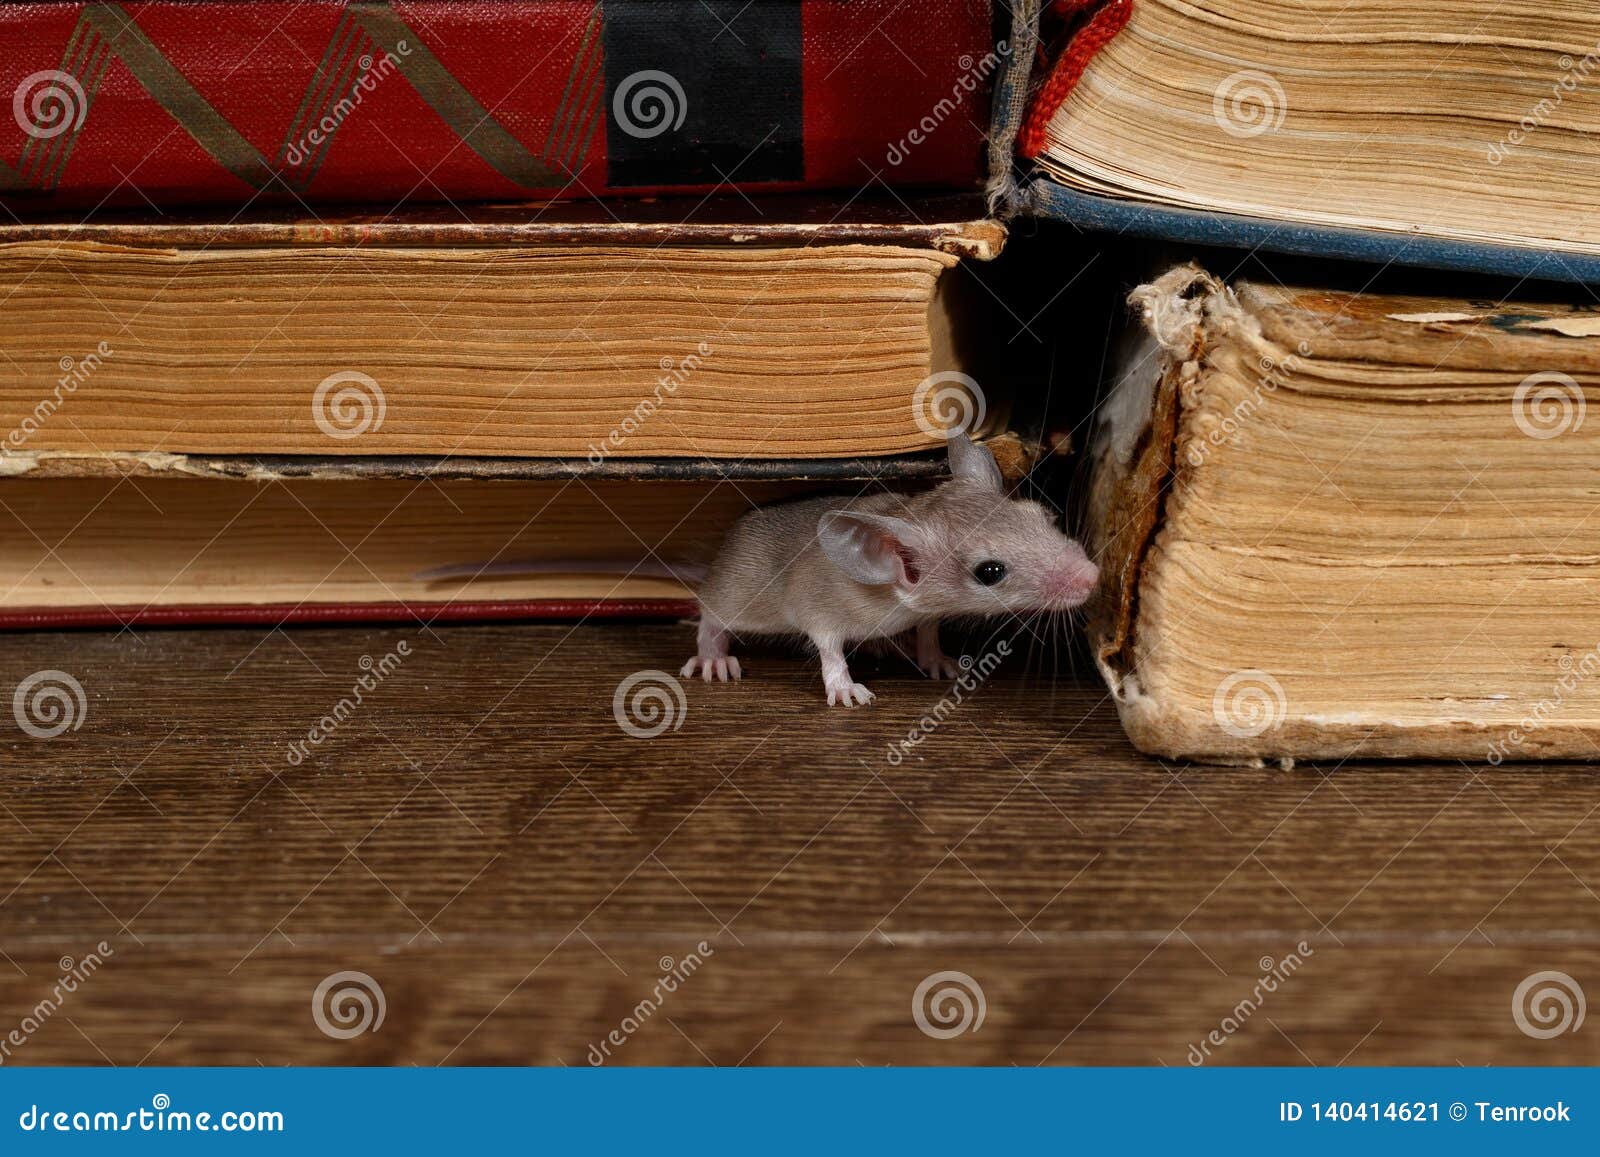 close-up the young mouse sniffs the old book on the shelf in the library.